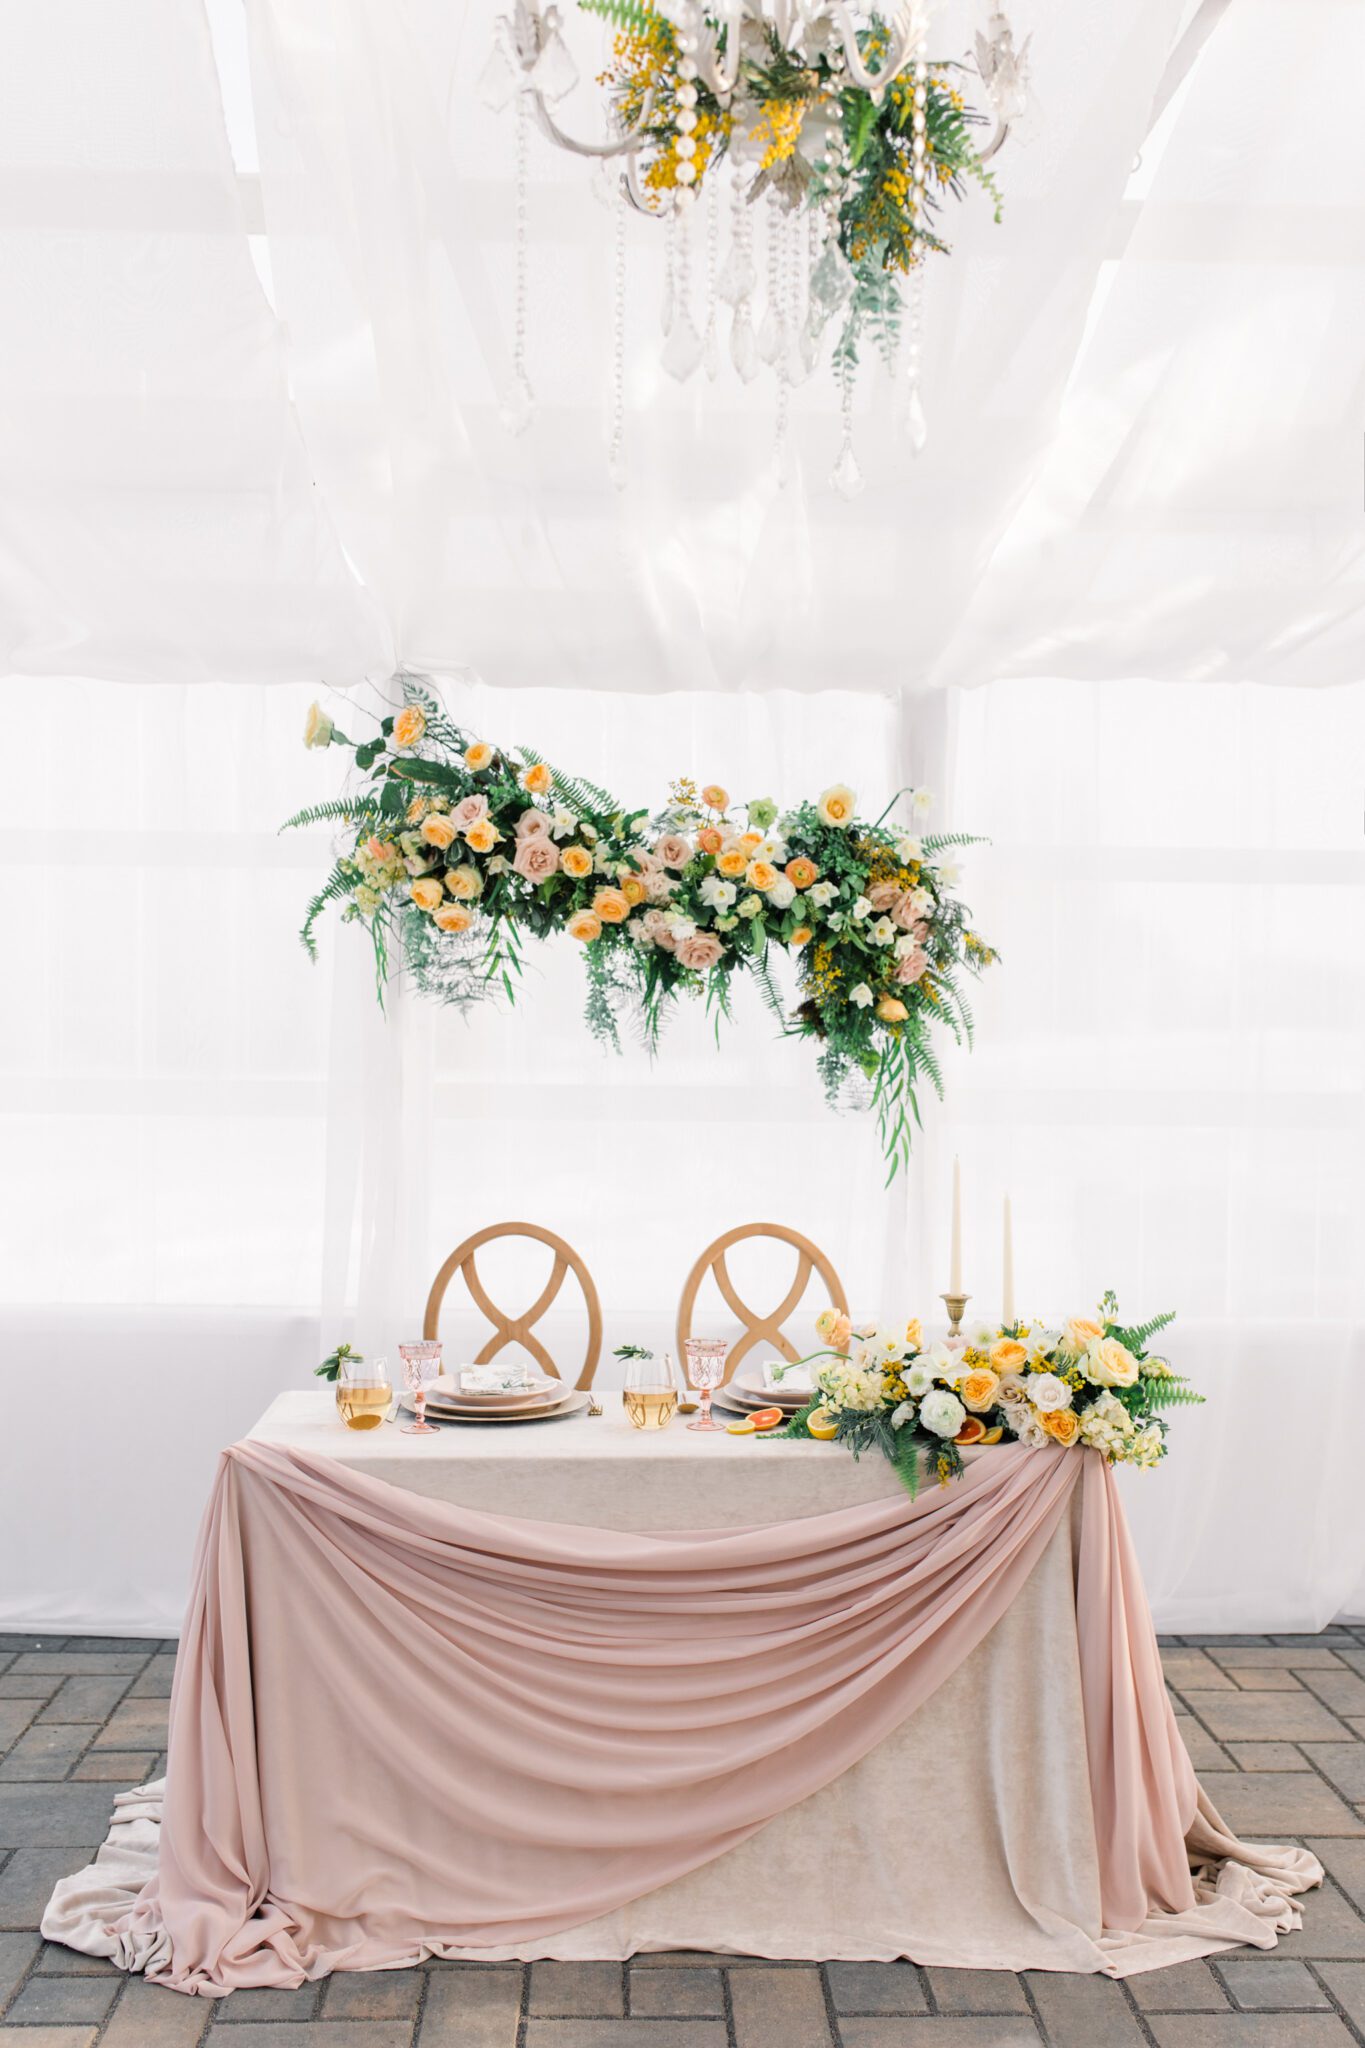 Sweetheart table design with yellow and peach spring inspired floral arrangements, custom pink glasswear, plates, and stemware, captured by Kayla Lynn Photography